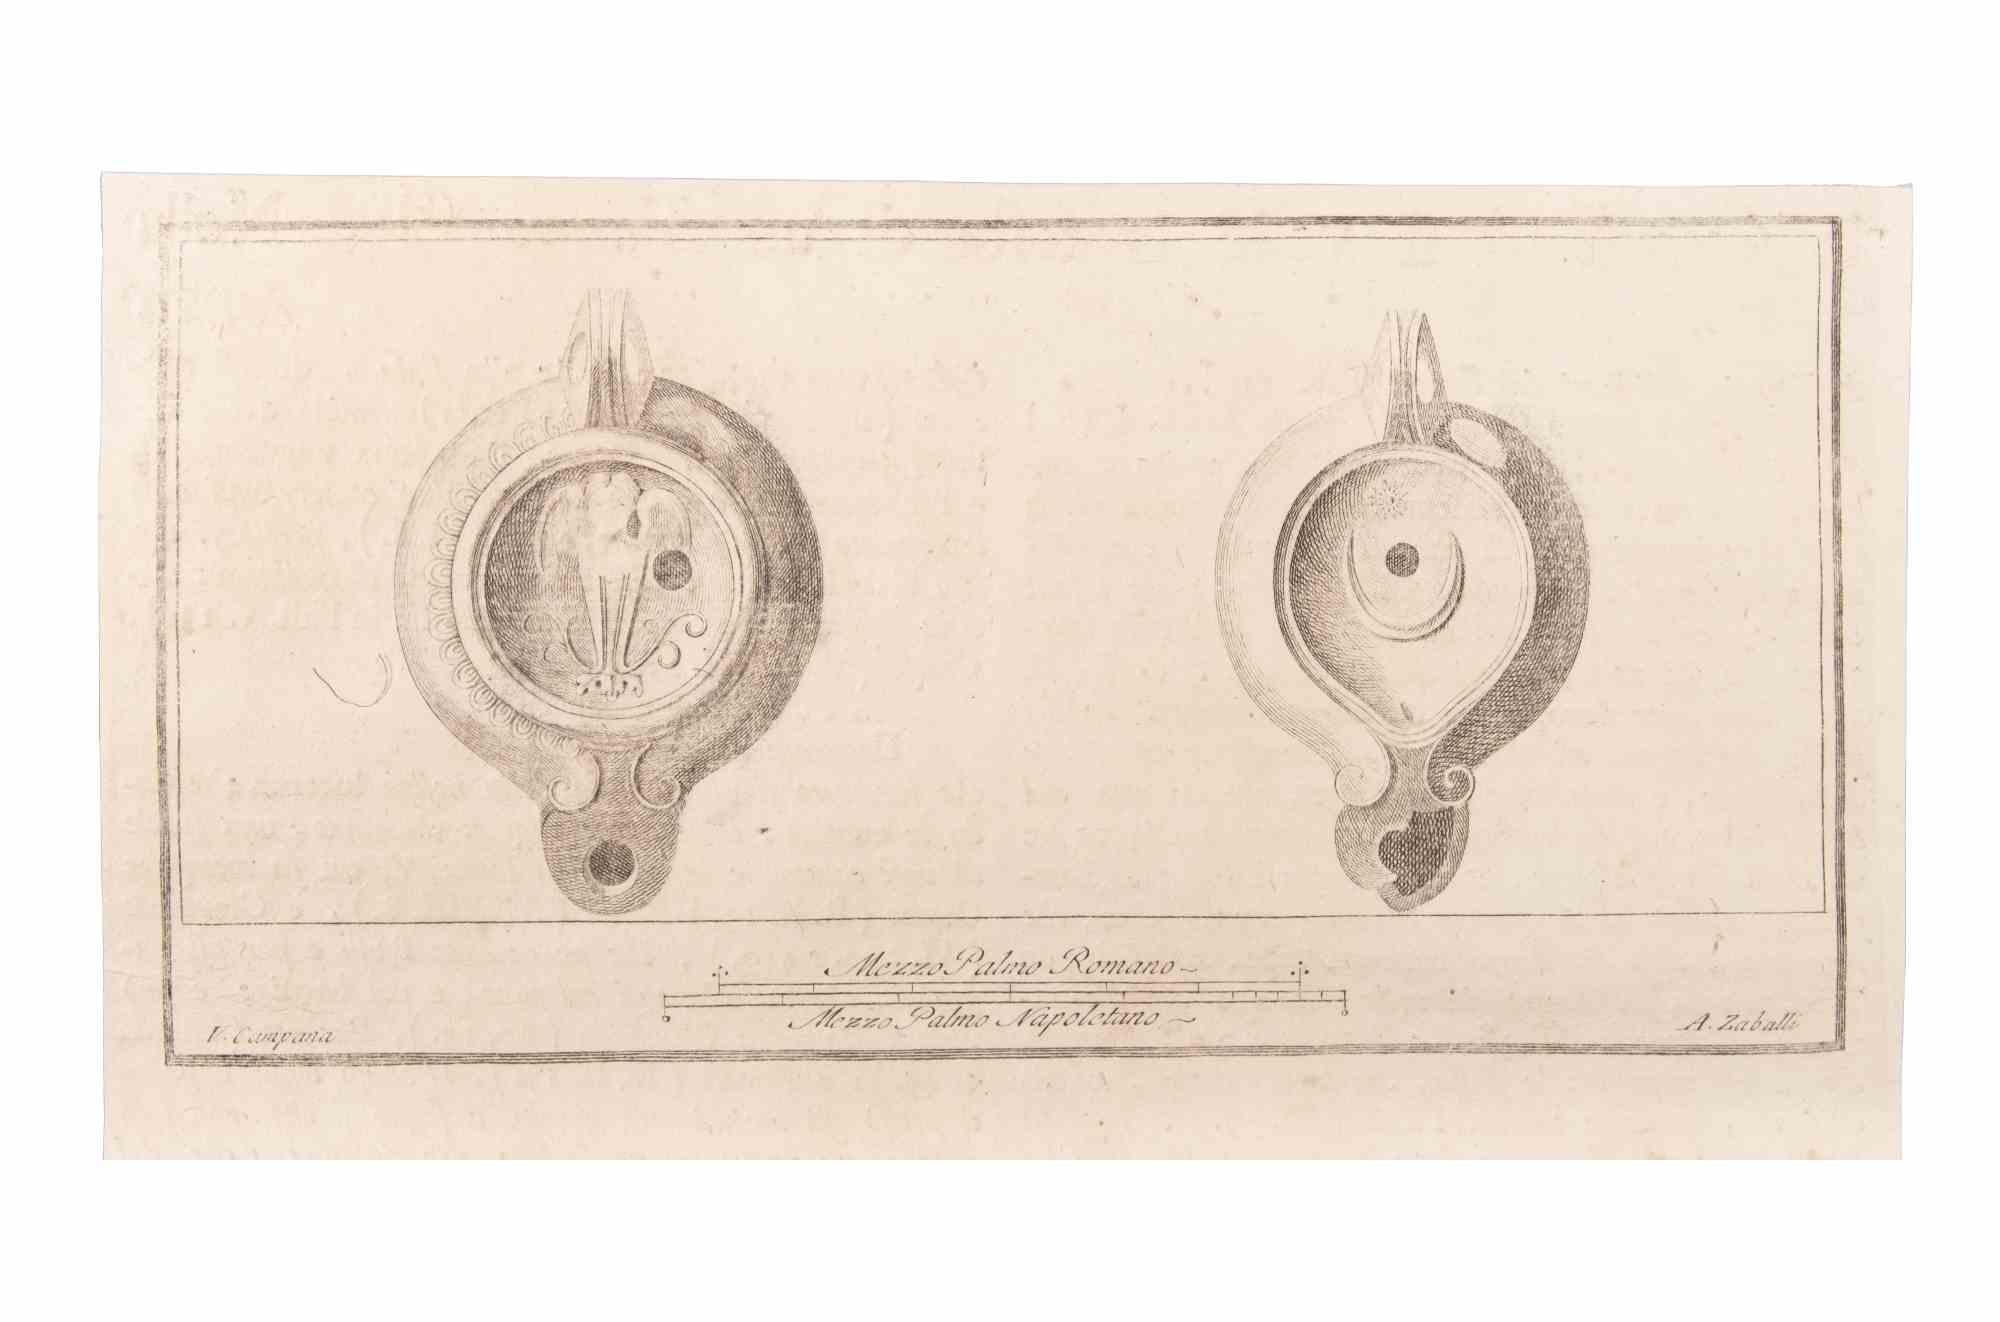 Oil Light is an Etching realized by Vincenzo Campana (1730-1806).

The etching belongs to the print suite “Antiquities of Herculaneum Exposed” (original title: “Le Antichità di Ercolano Esposte”), an eight-volume volume of engravings of the finds